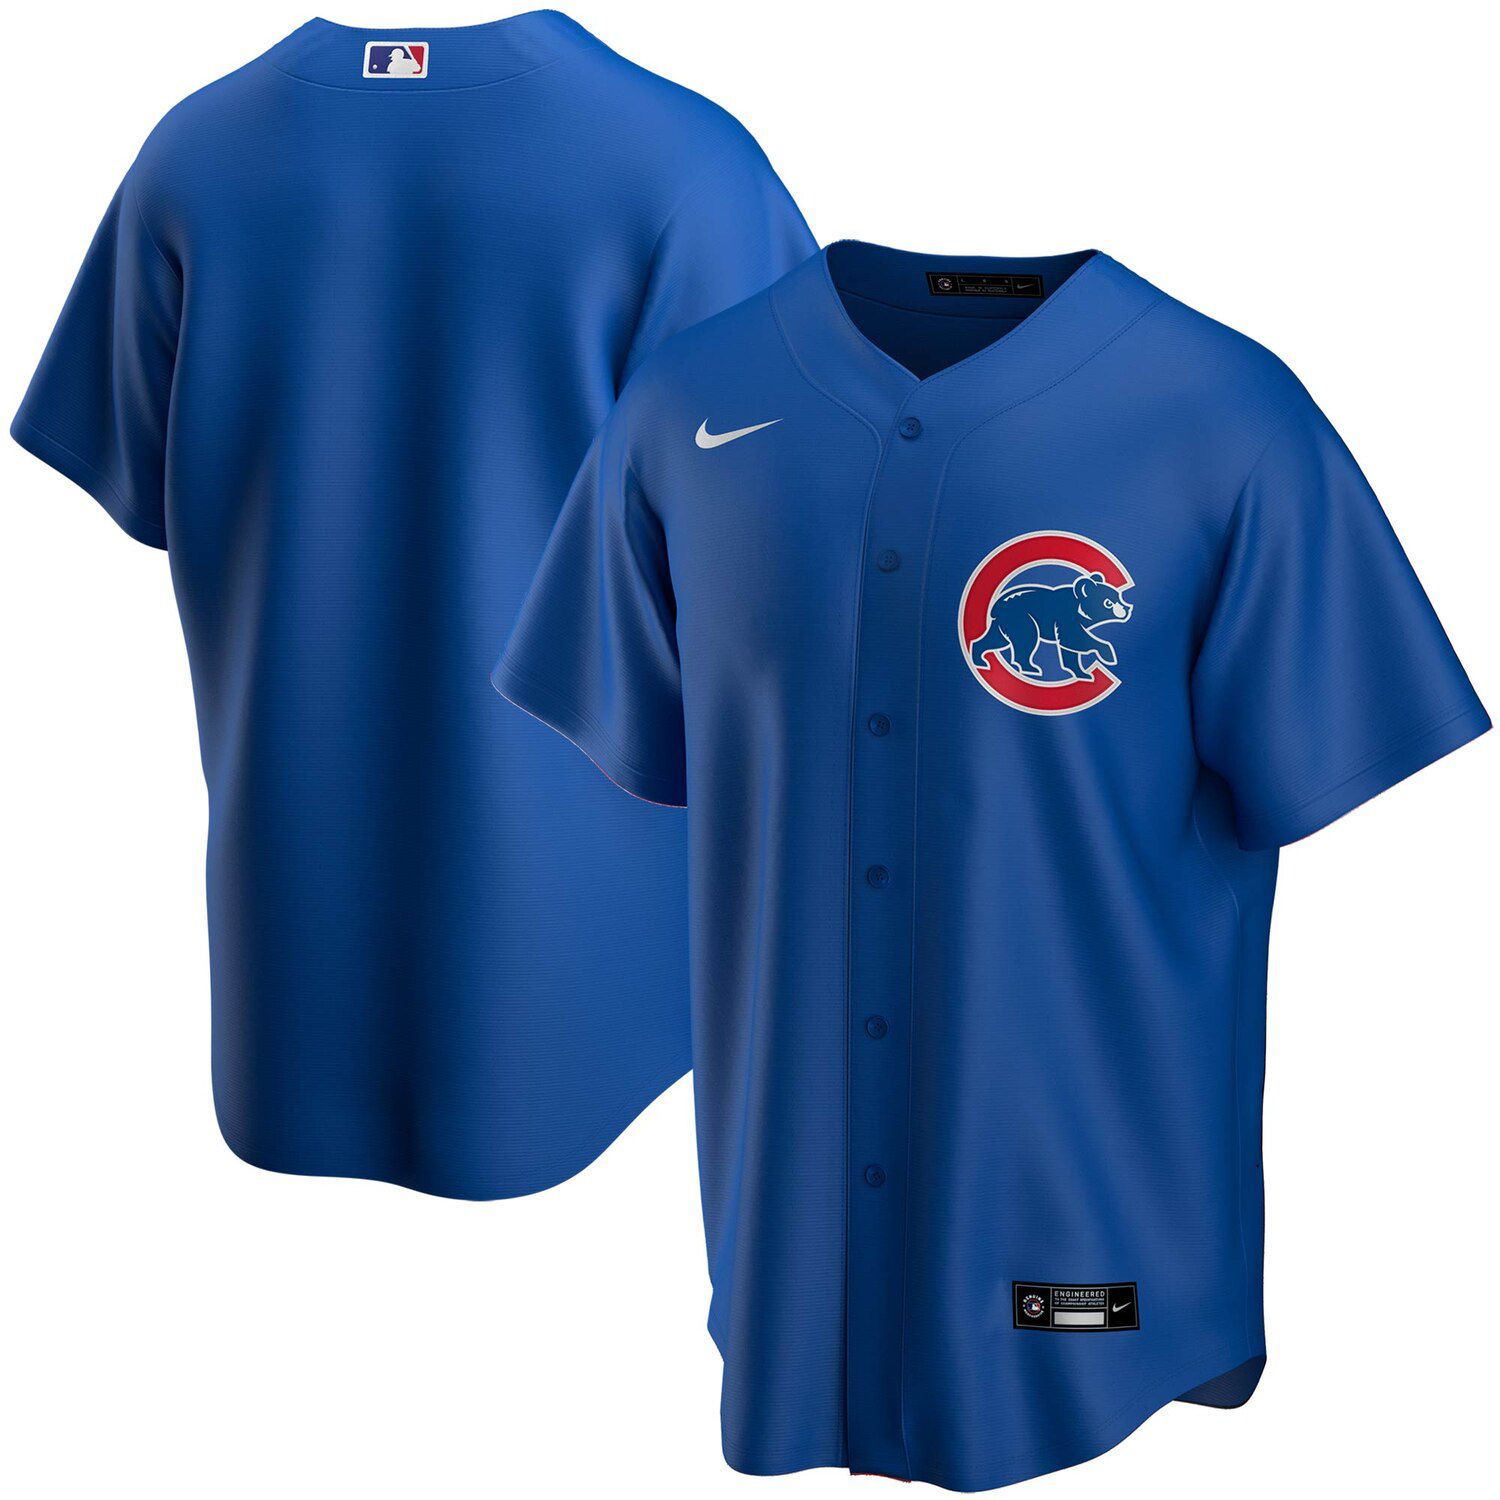 where can i buy a cubs jersey near me